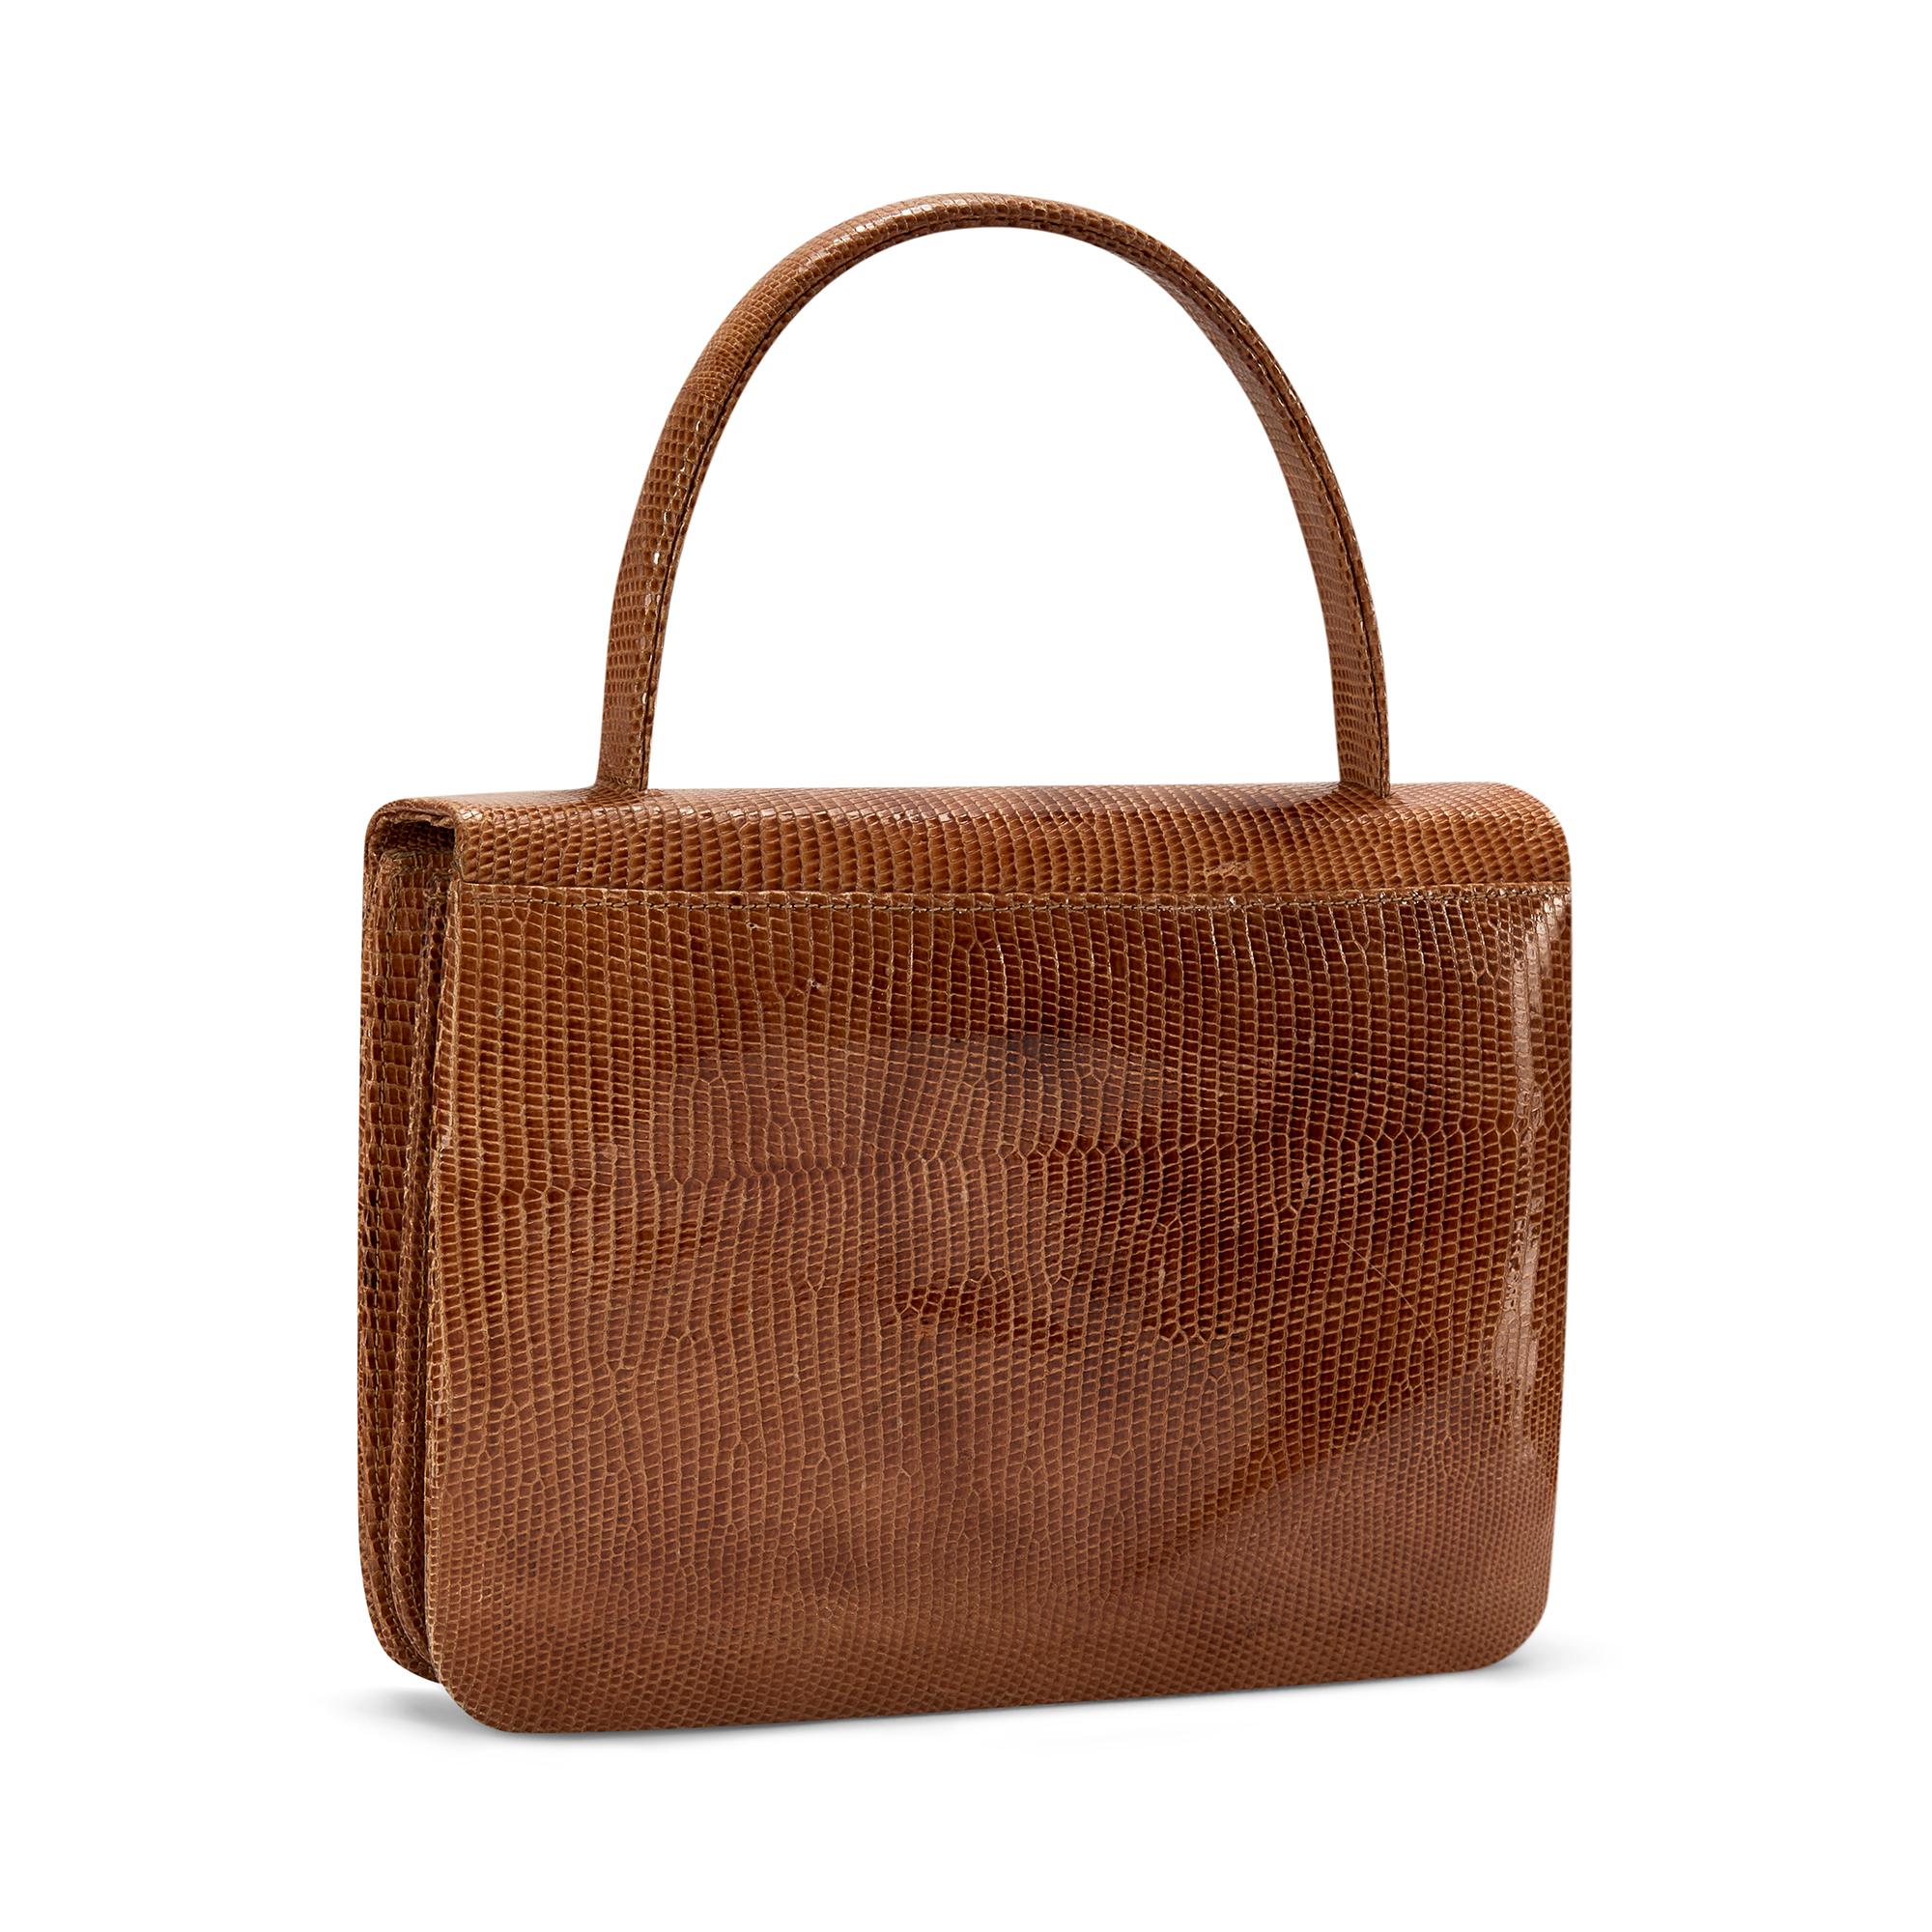 This fine quality 1960s bag is crafted from the best tan lizard leather with a short top handle and flap closure. The intricate clasp is sculpted from brass and detailed with coordinating lizard leather. Inside, there is a concertina opening with